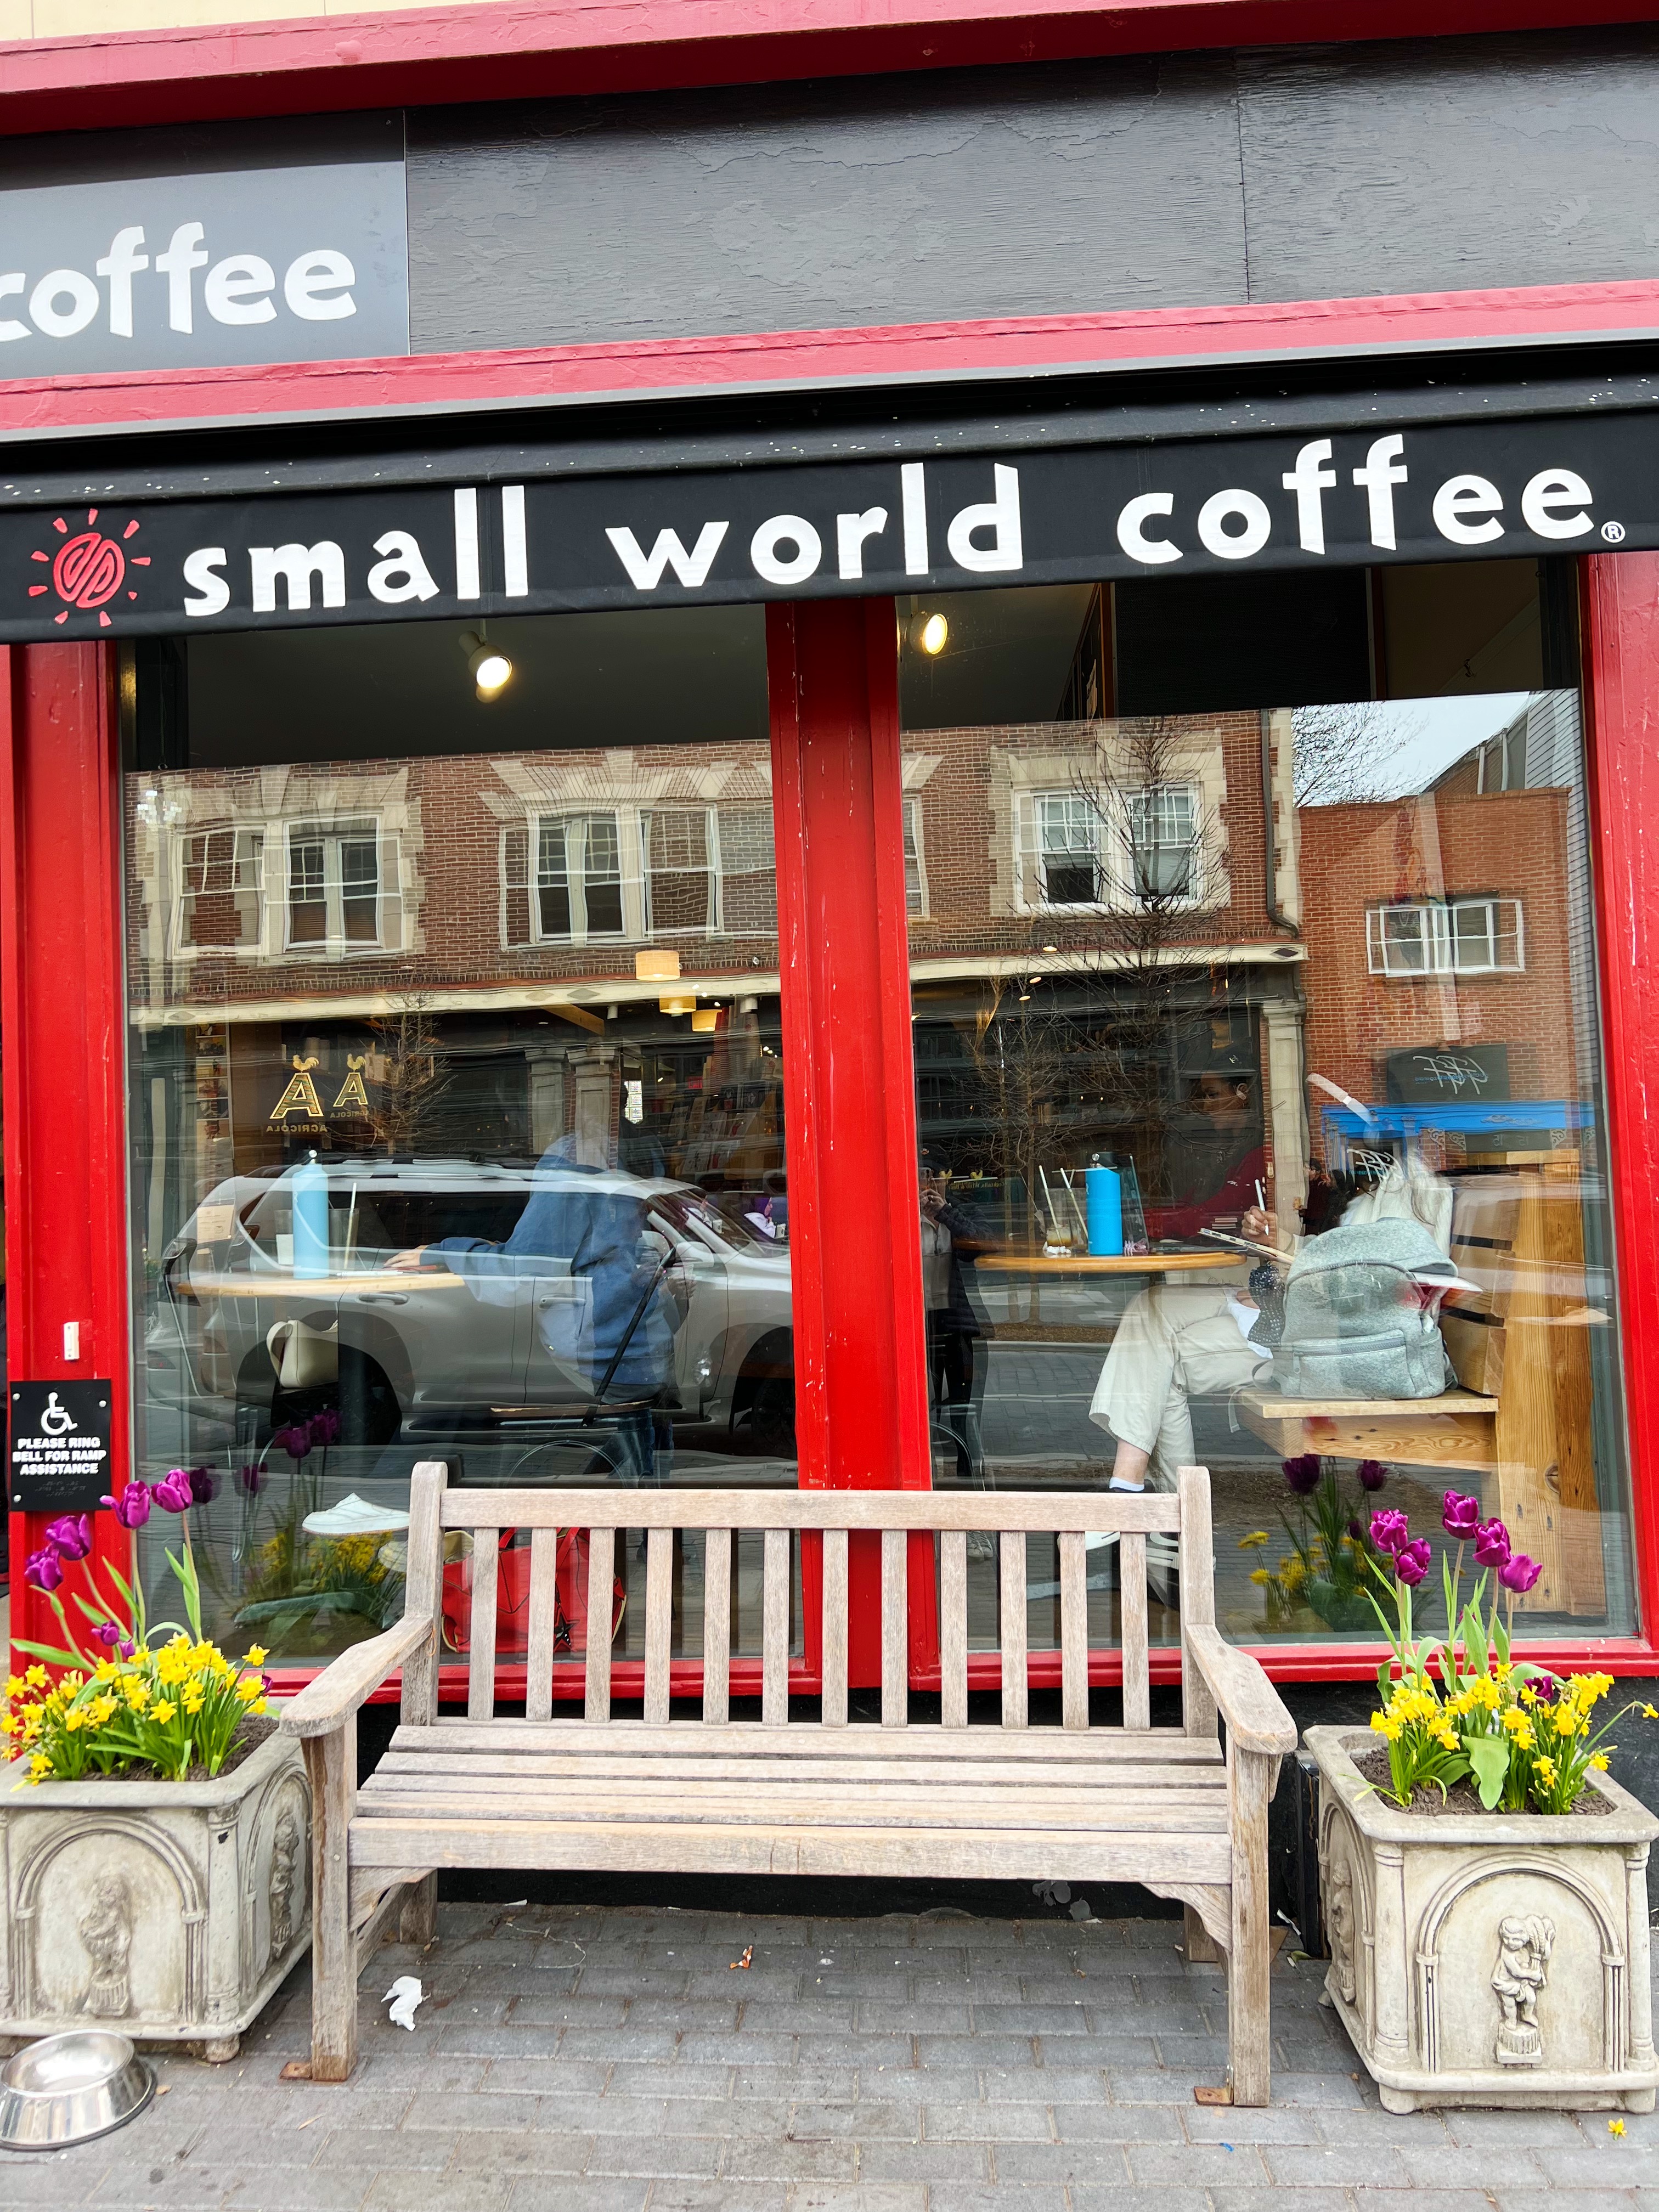 Exterior of Small World Coffee with a bench, floral planters, red lacquer paint and "Small World Coffee" awning